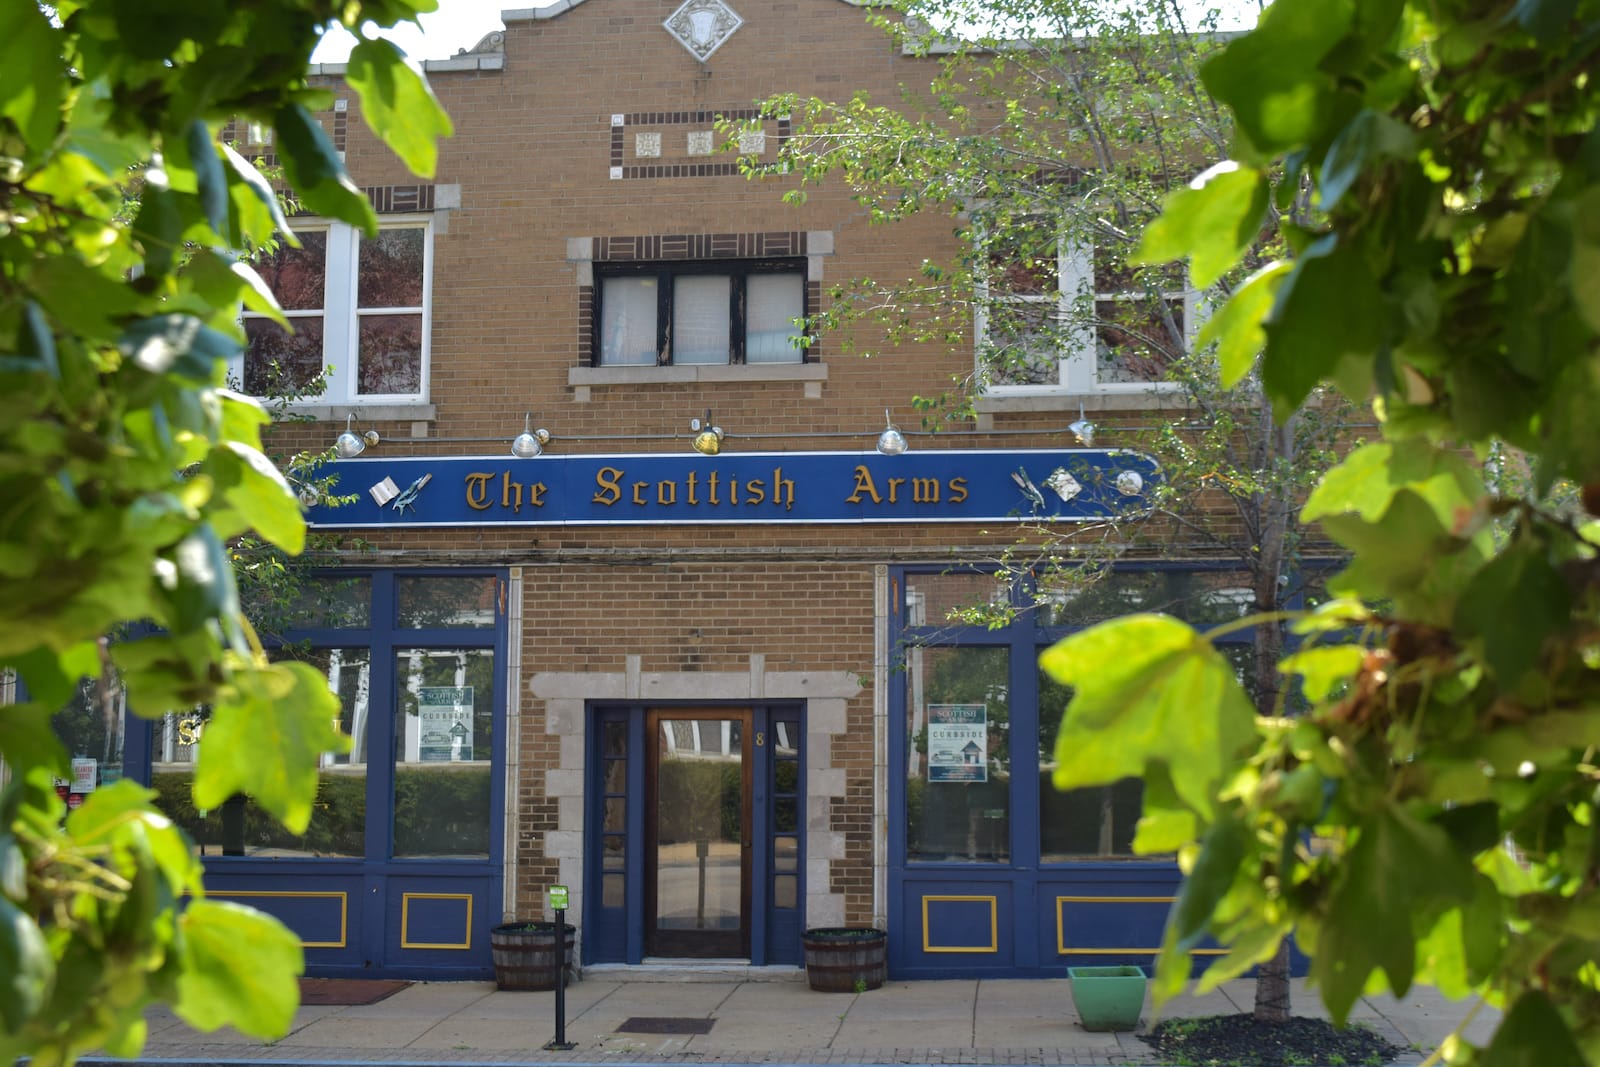 The outside of the Scottish Arms in St. Louis, MO